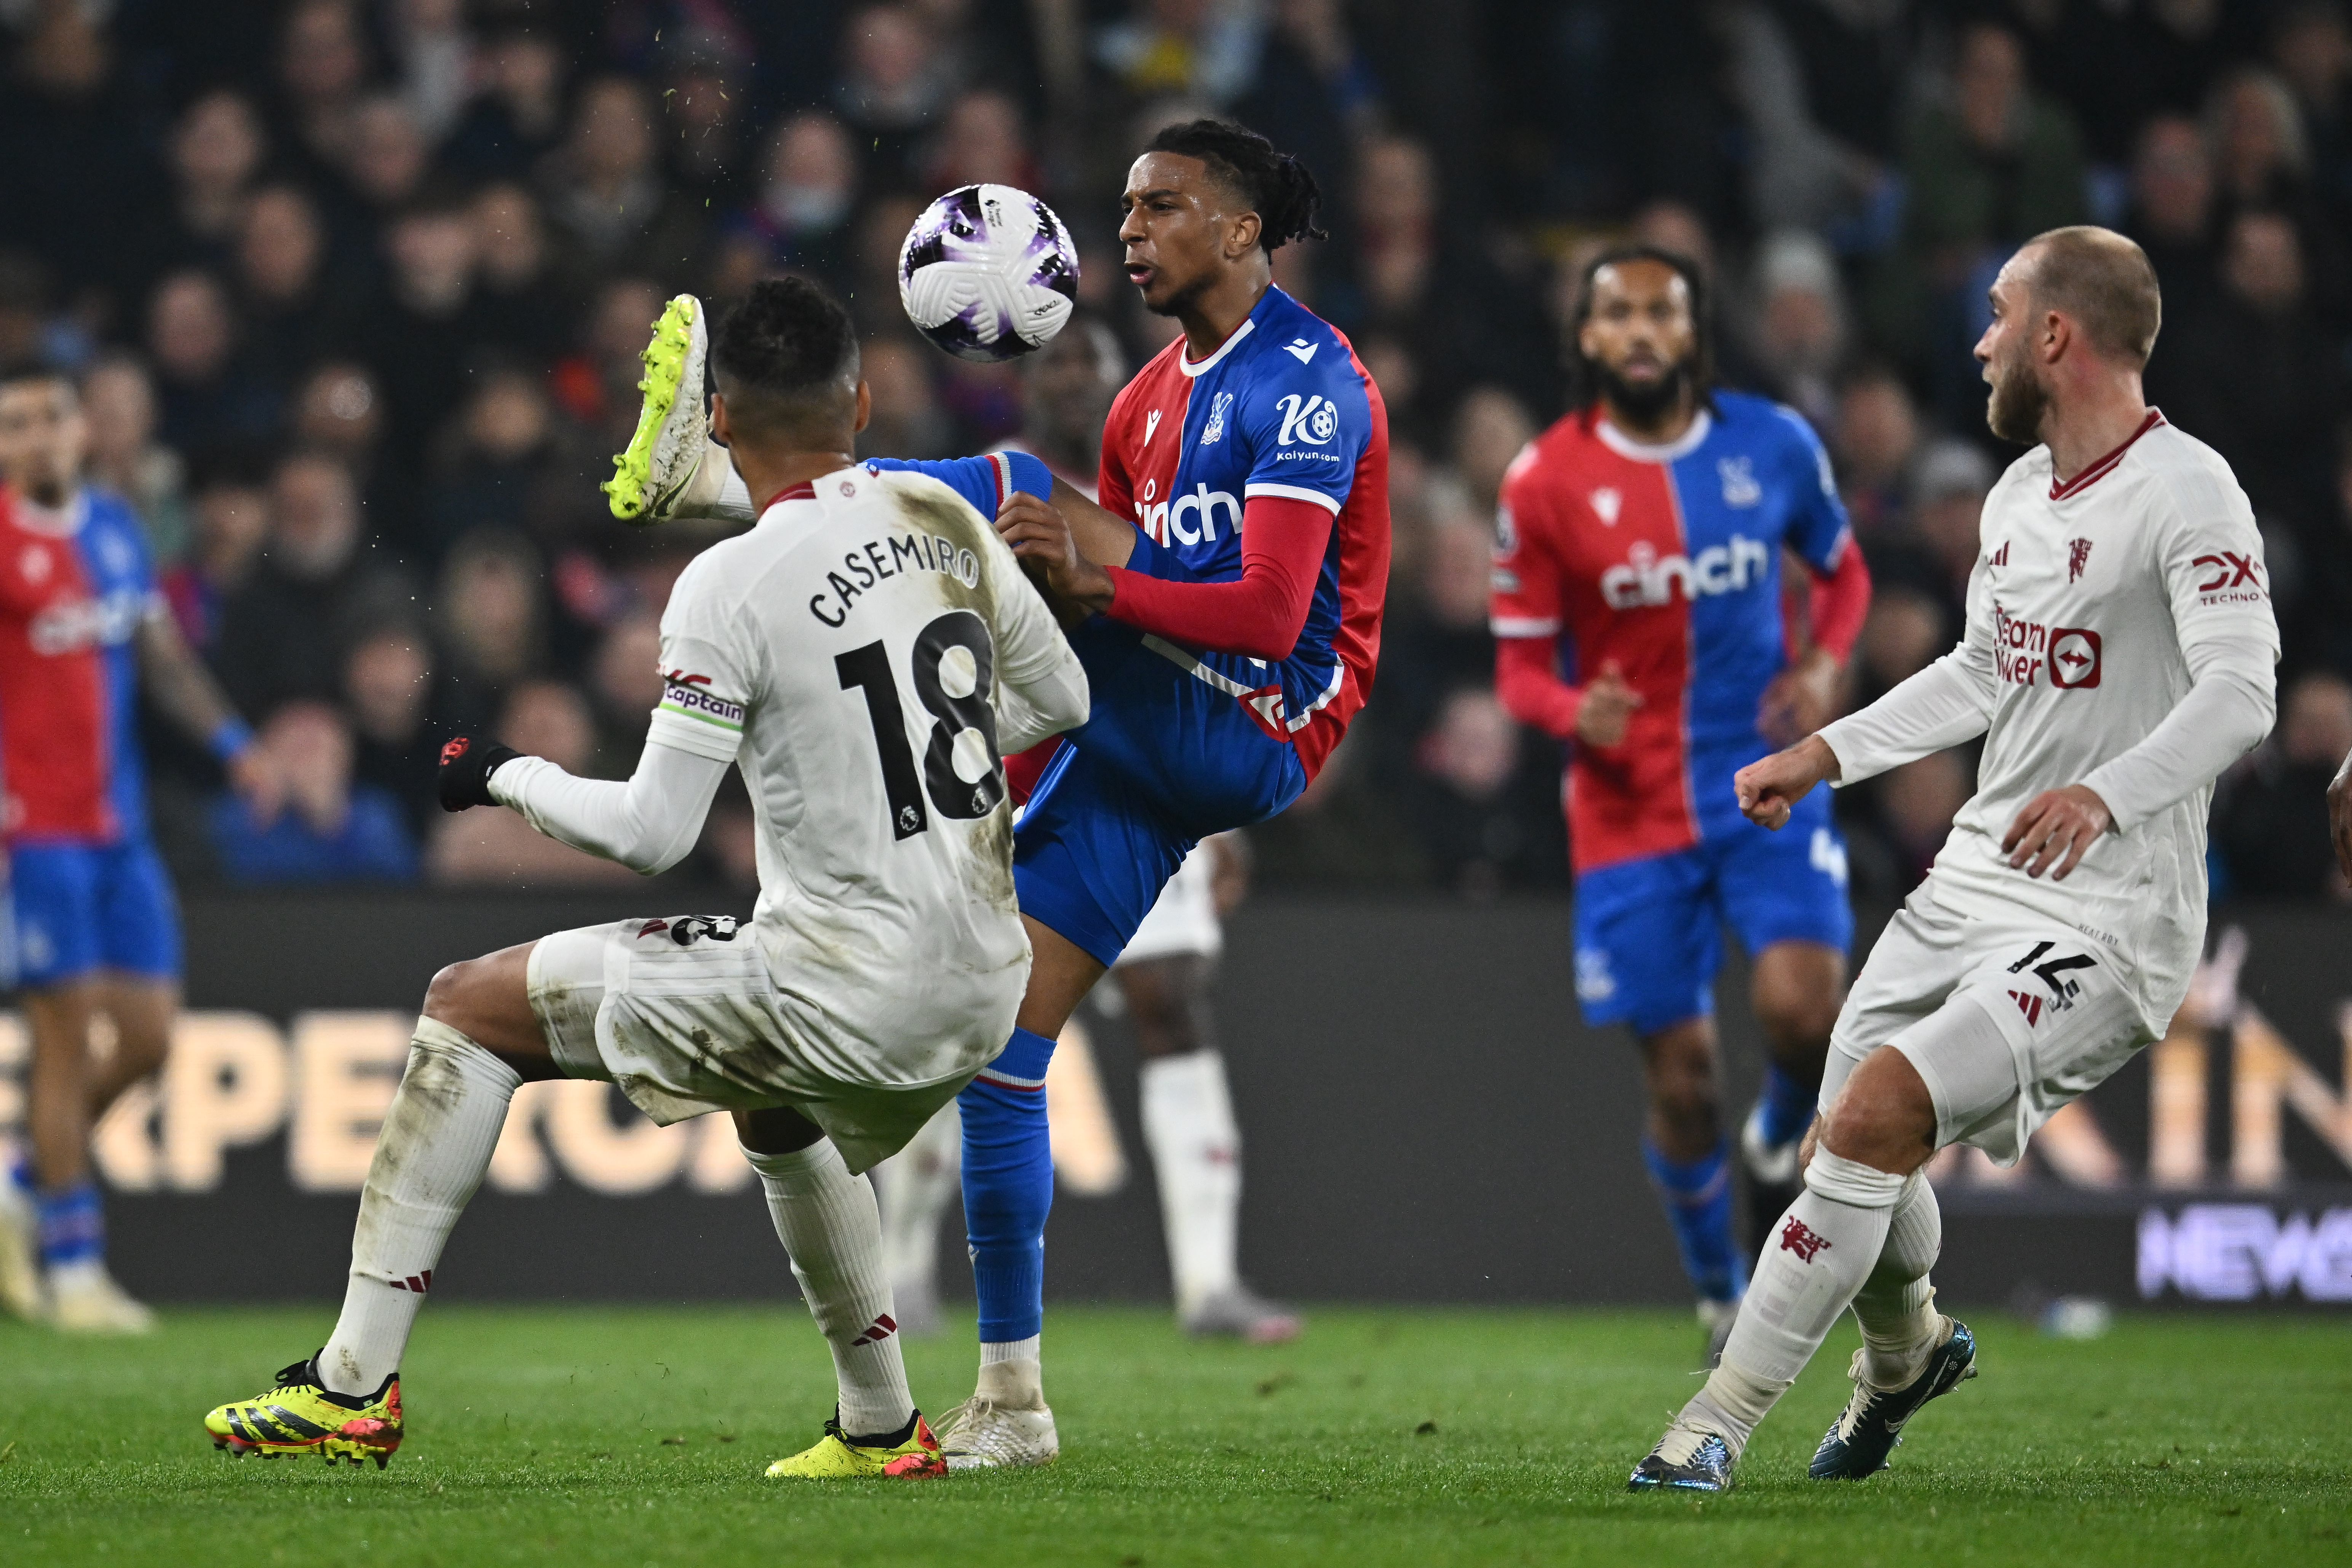 Go to MLS or Saudi' - Casemiro told to leave Manchester United after  'embarrassing' performance against Crystal Palace